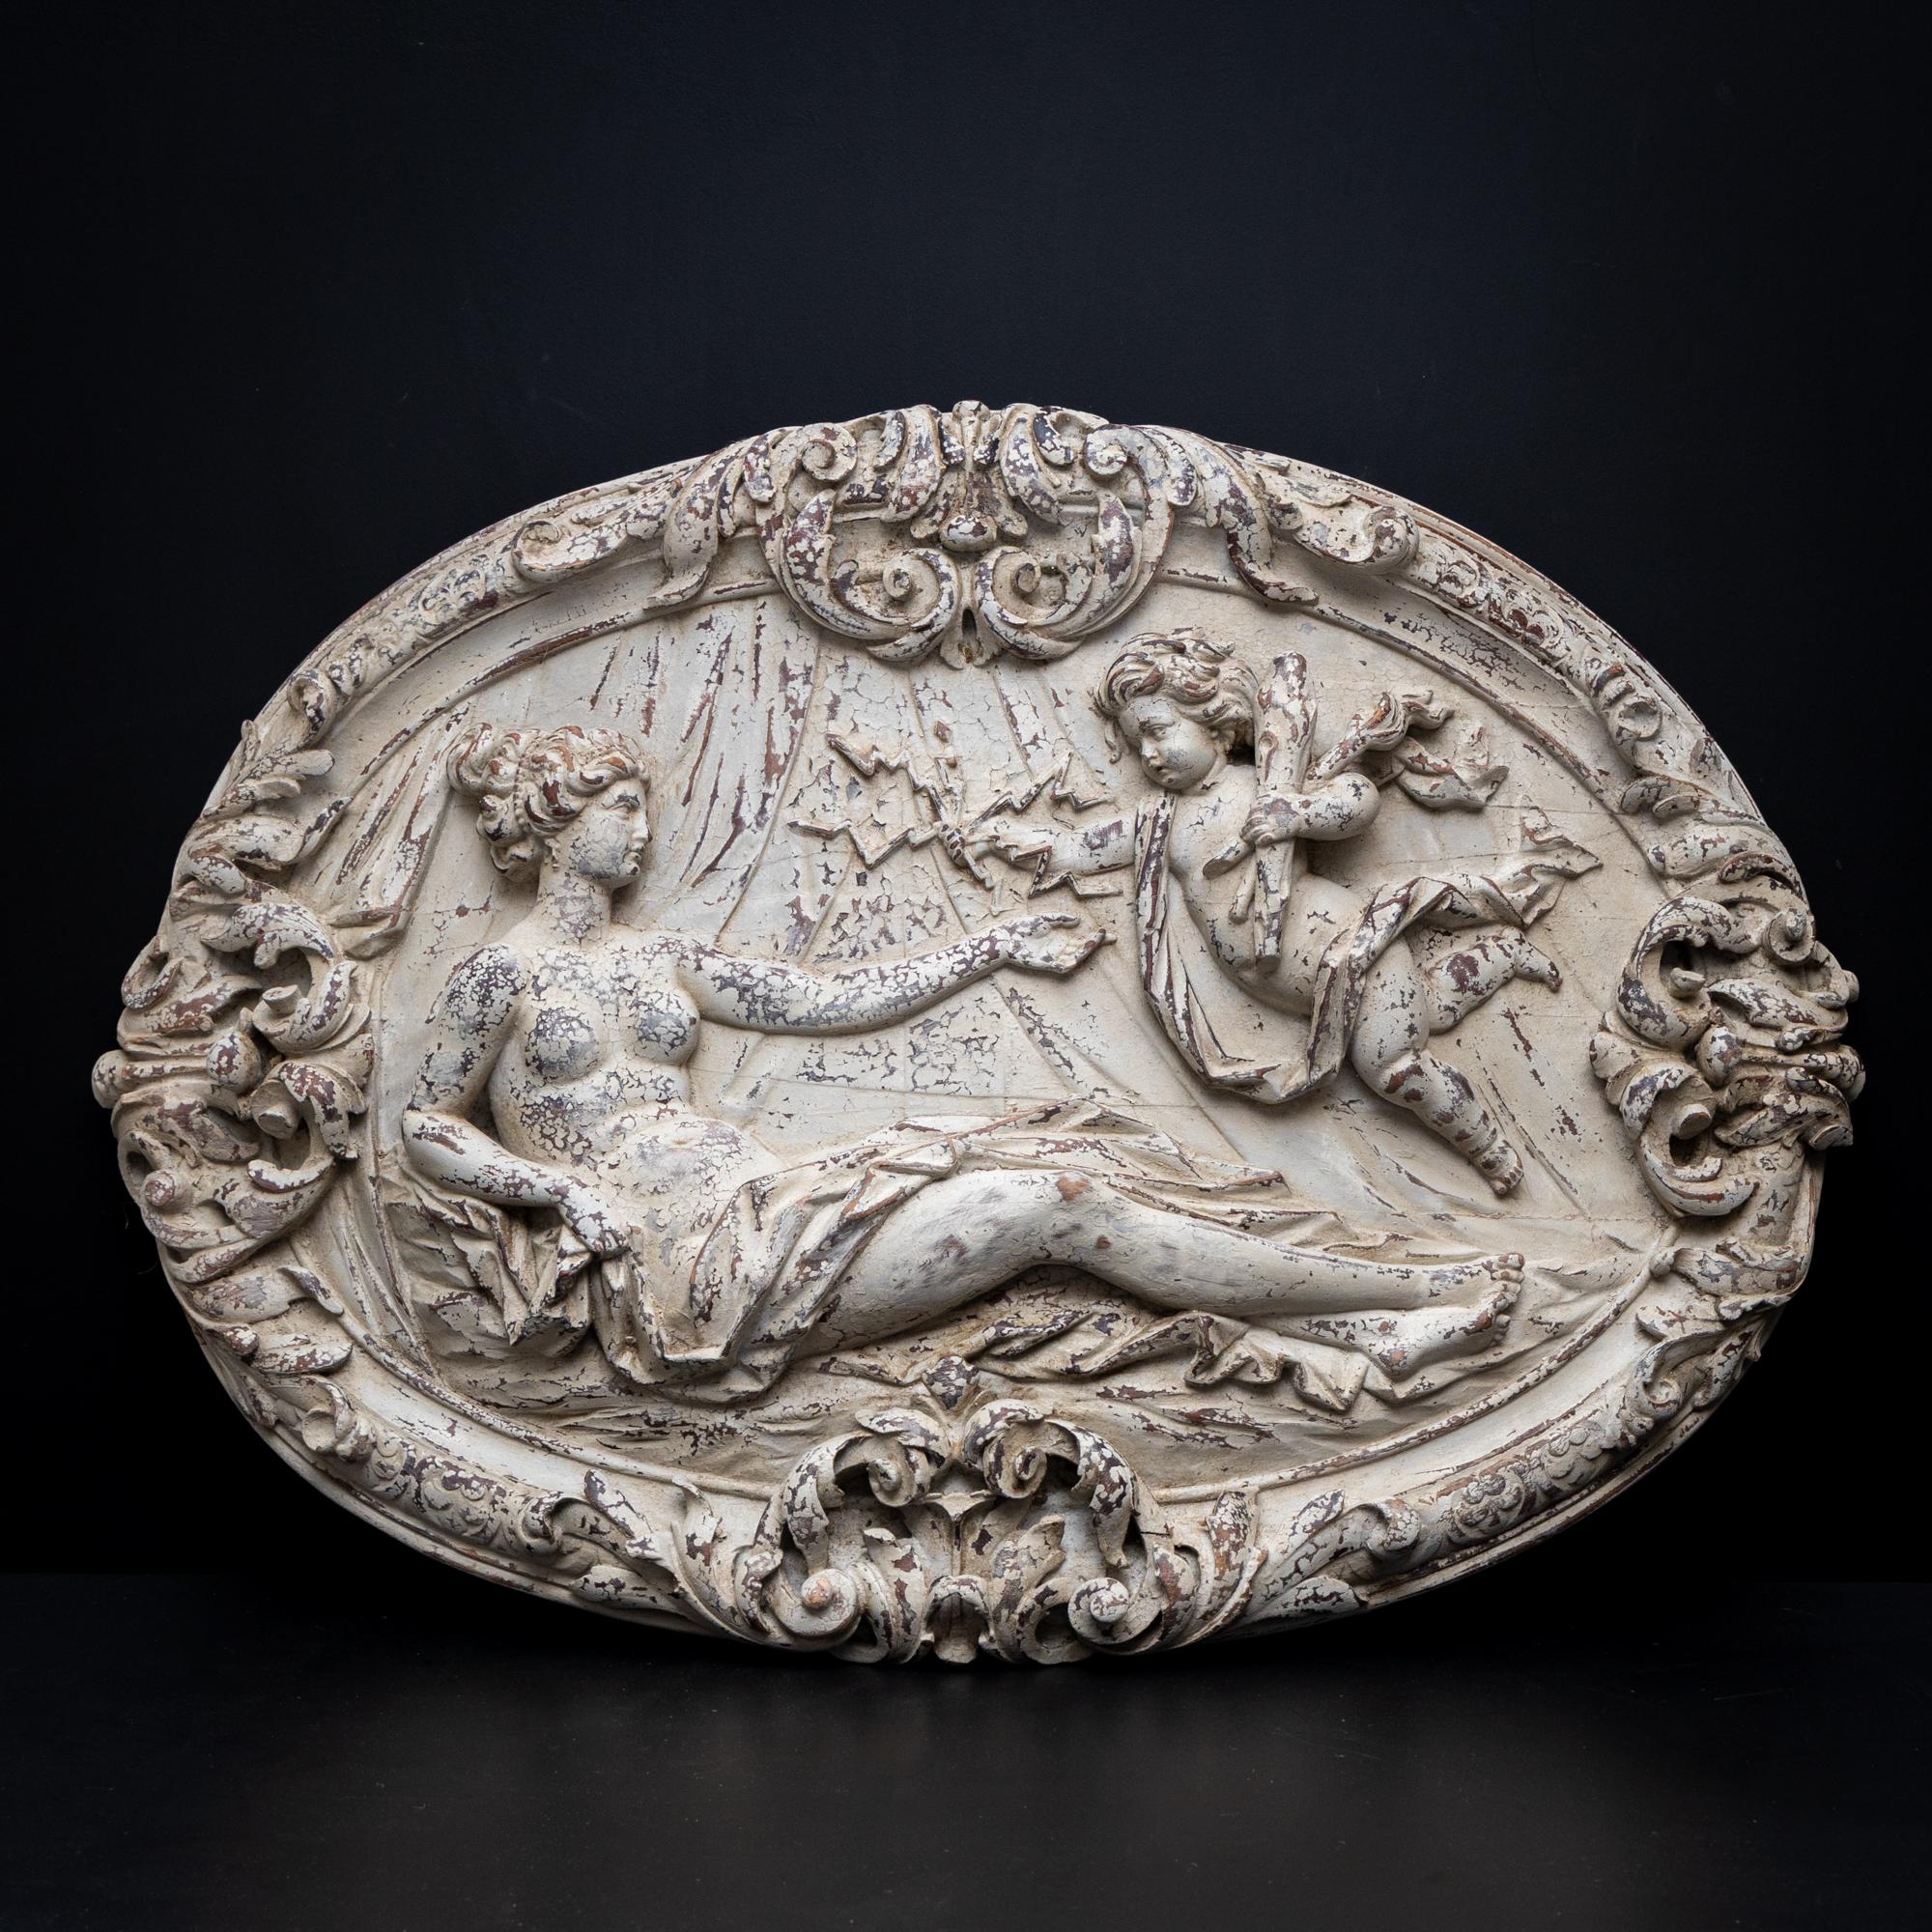 Carved relief in medallion form with rocaille decoration on the frame and depiction of Venus reclining, holding out her hand to Cupid armed with lightning bolts. The relief has been painted white and given an antique patina.